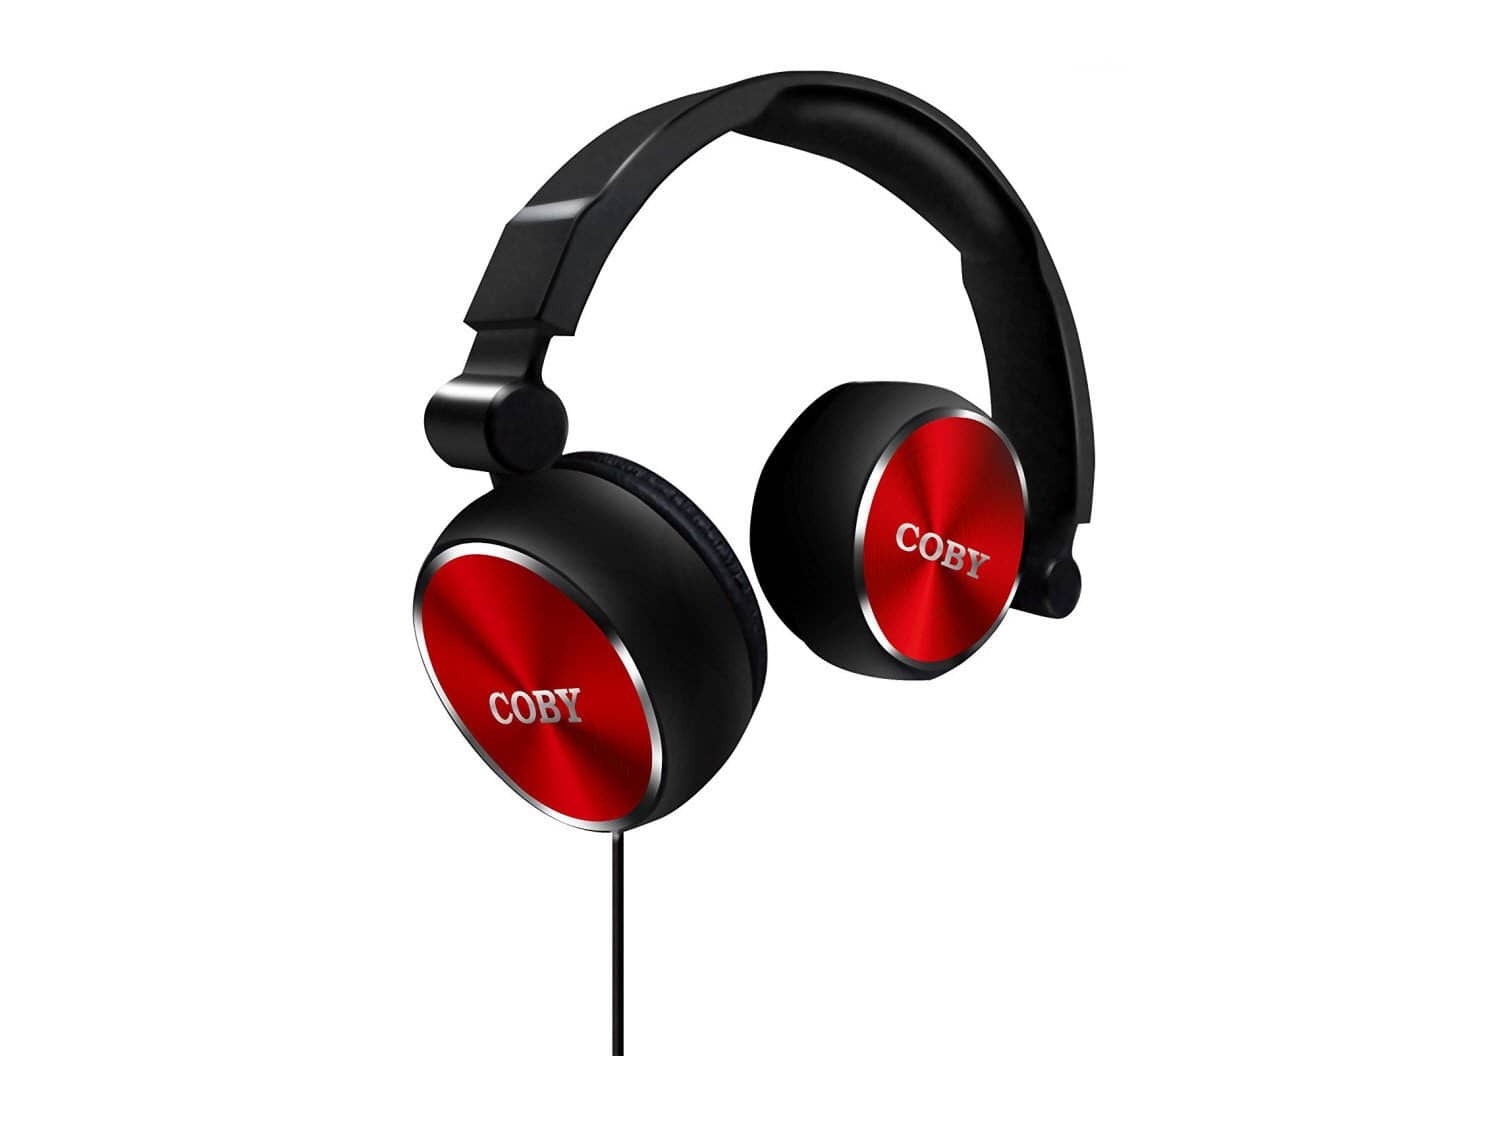 Coby CVH-804-RED Aluminum Foldz Headphones with Built-In Mic - Red